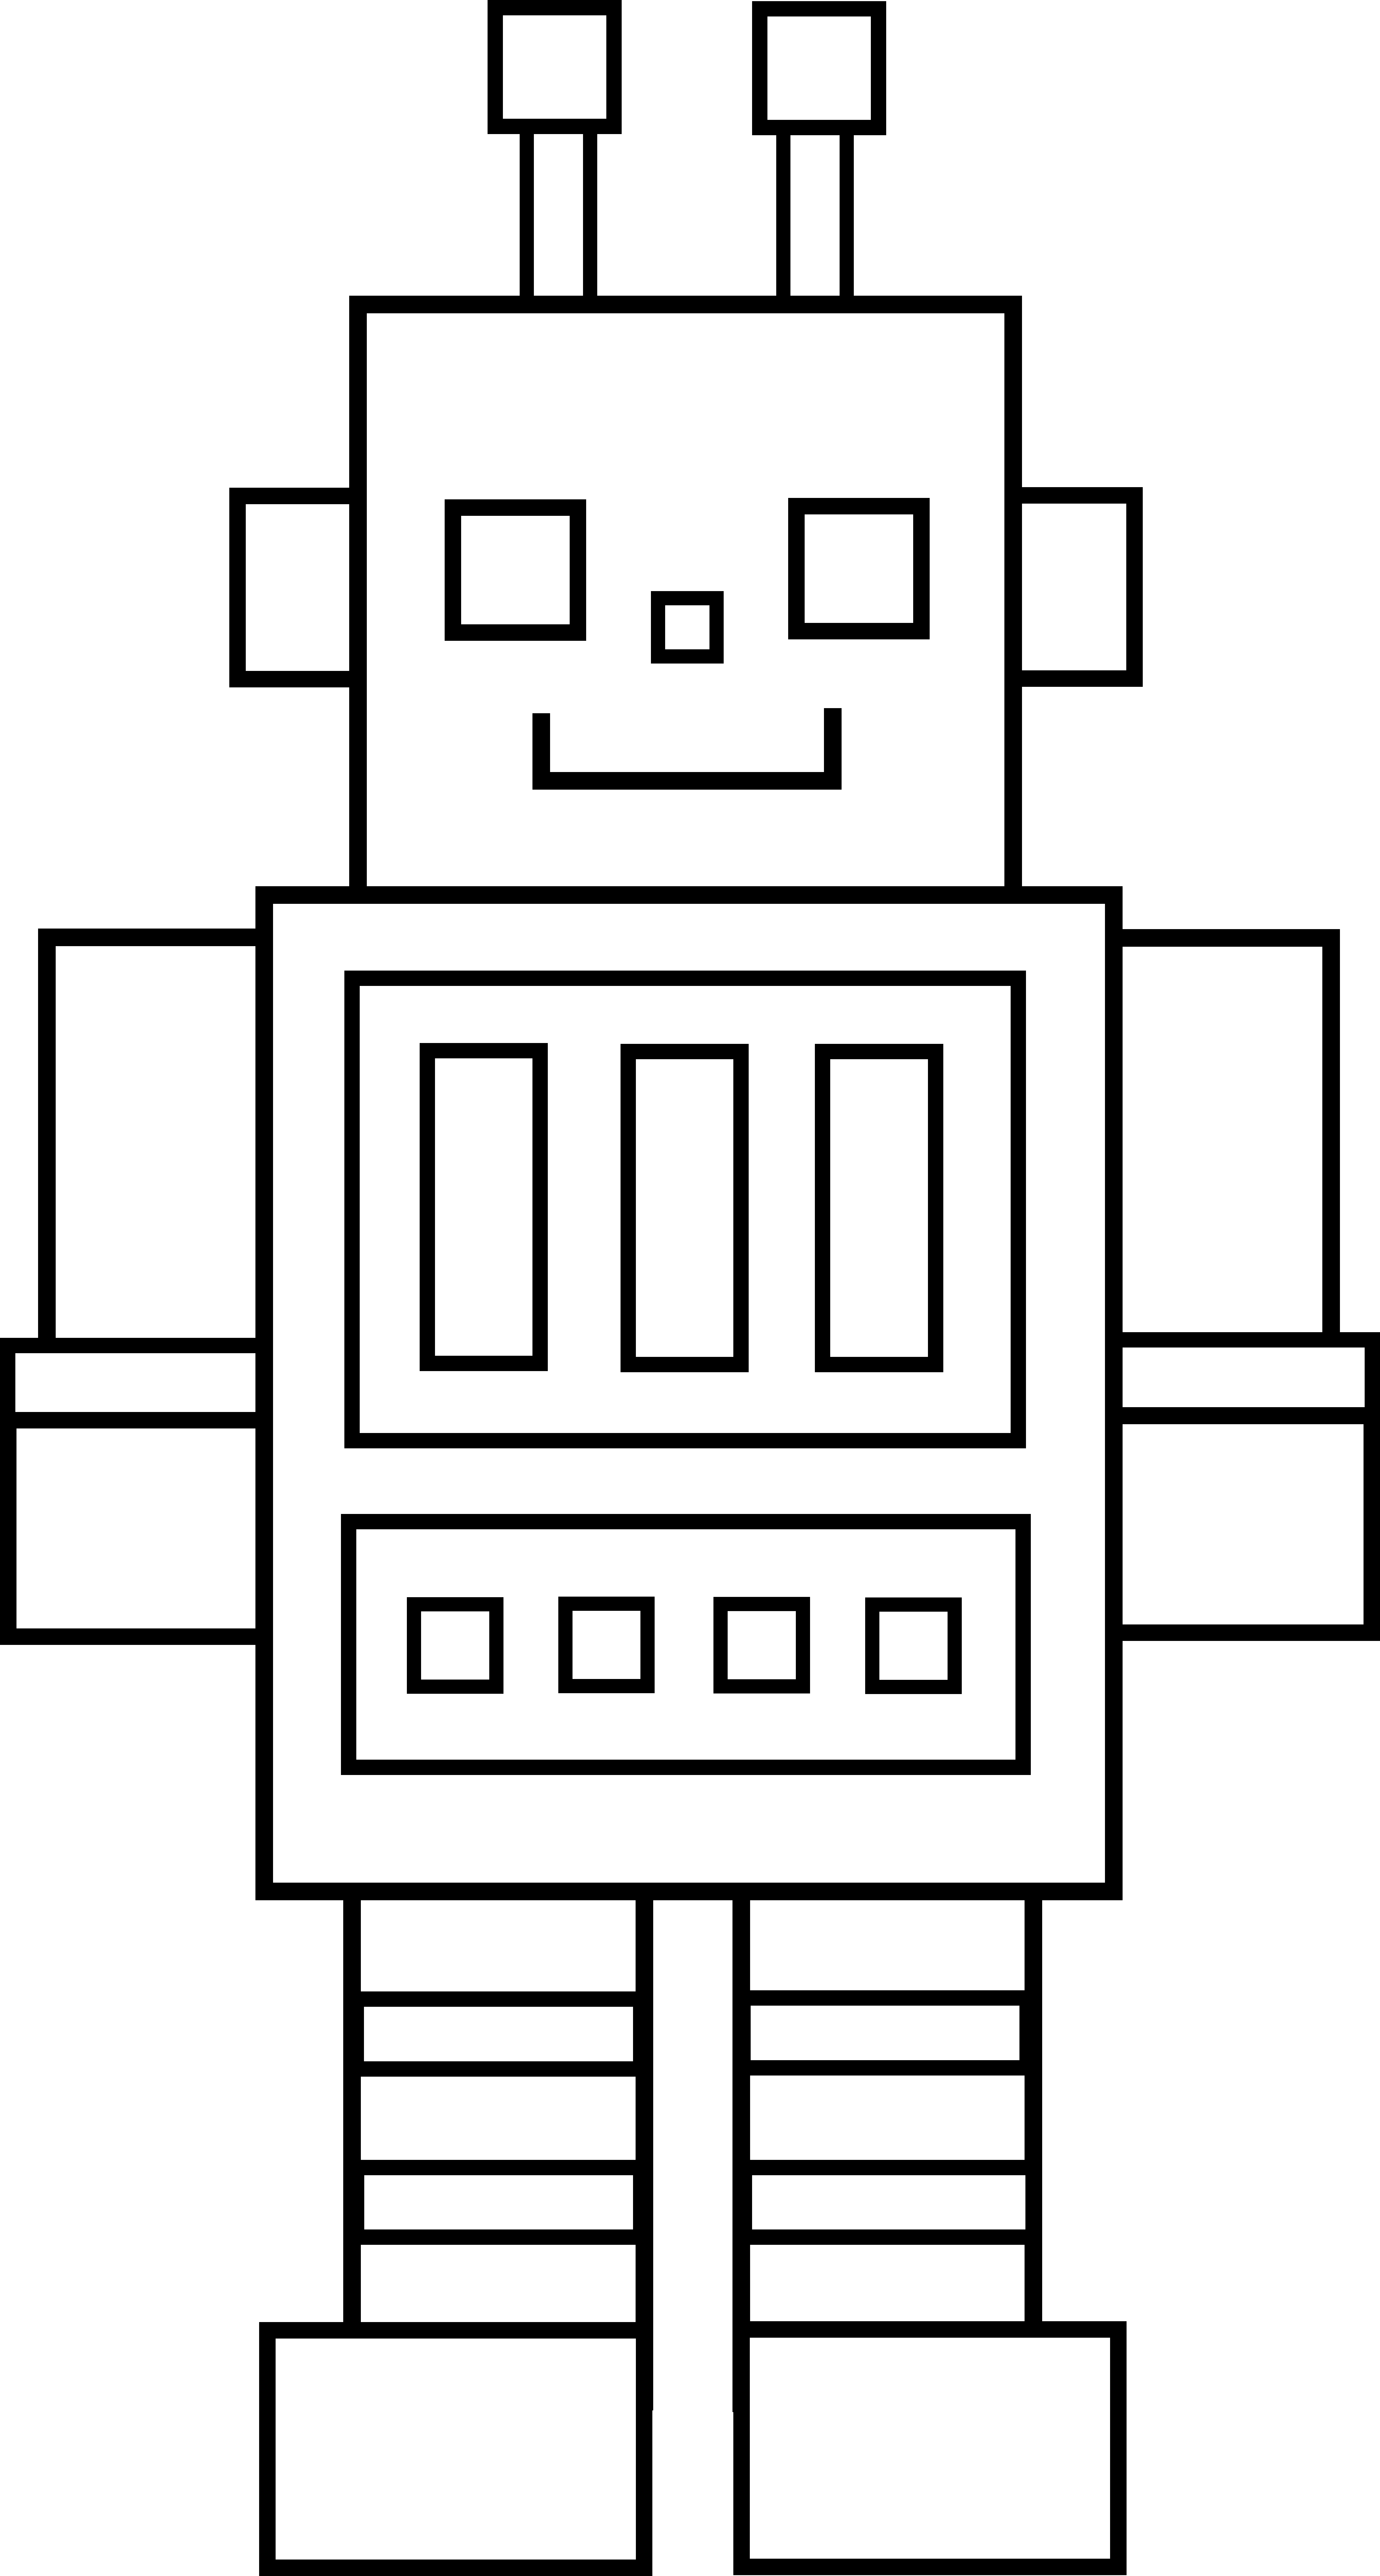 Images For > Simple Robot Drawing Outline